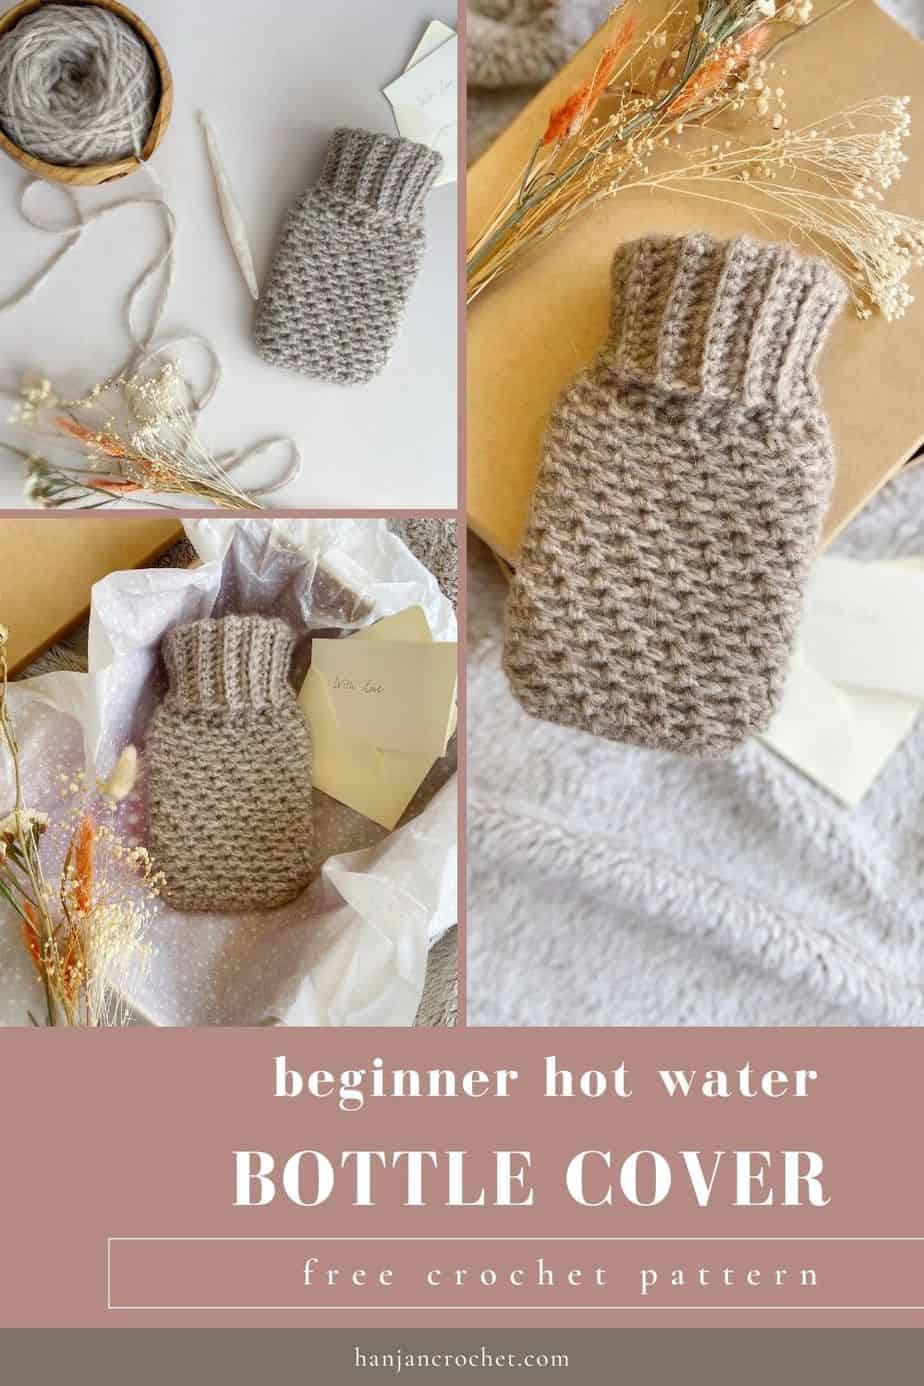 three images of fluffy beginners hot water bottle crochet cover pattern